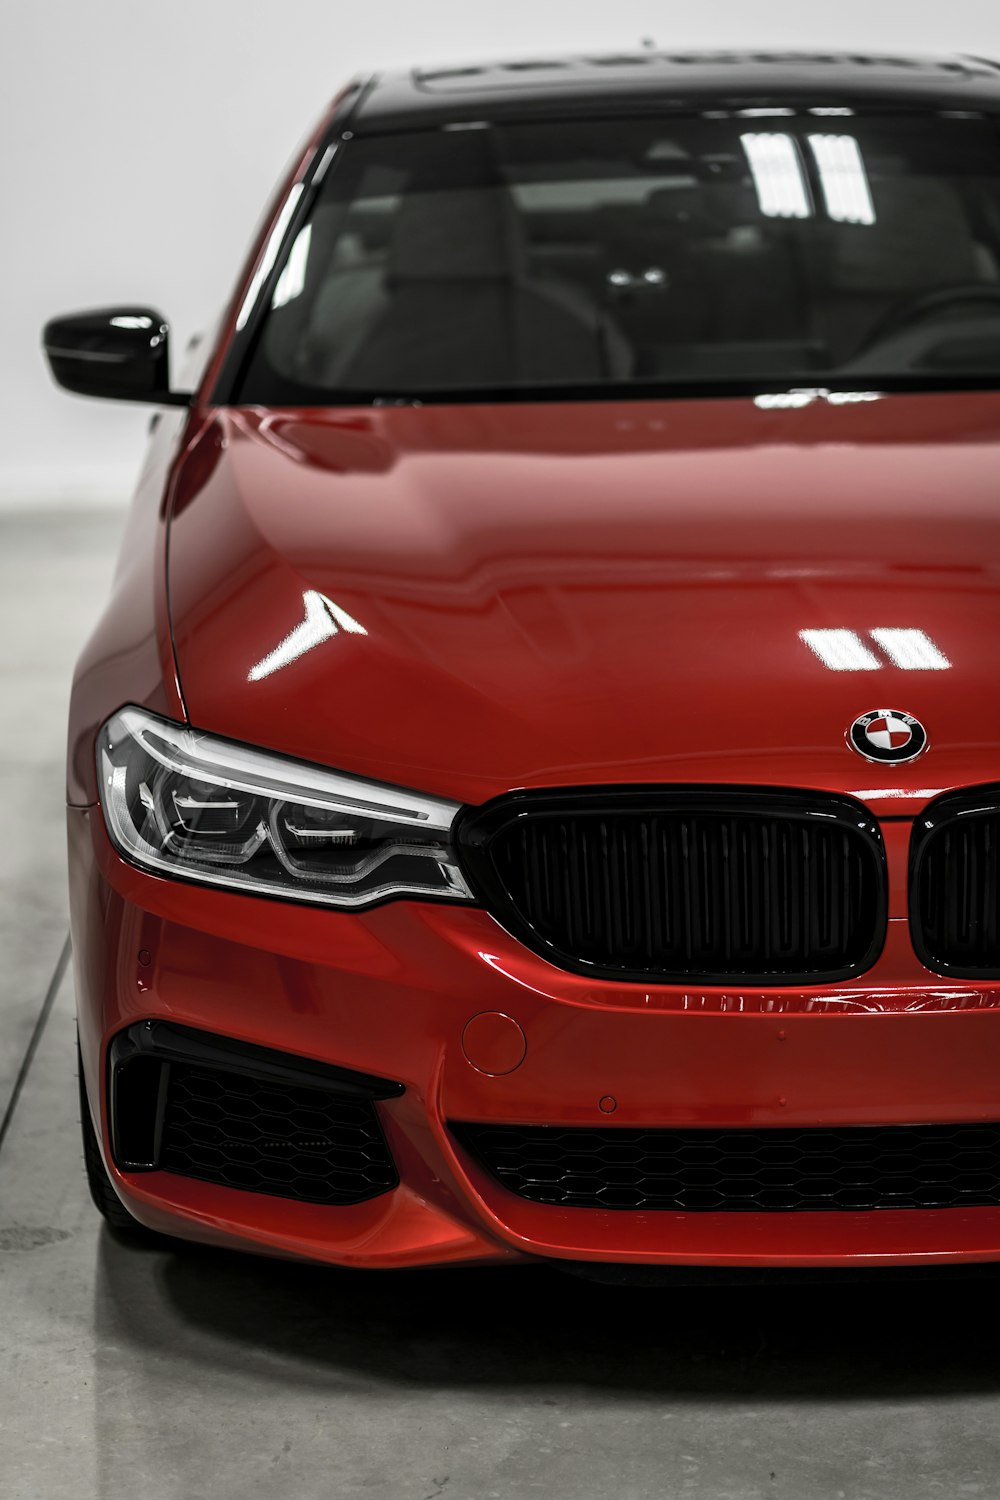 red bmw m 3 on road during daytime